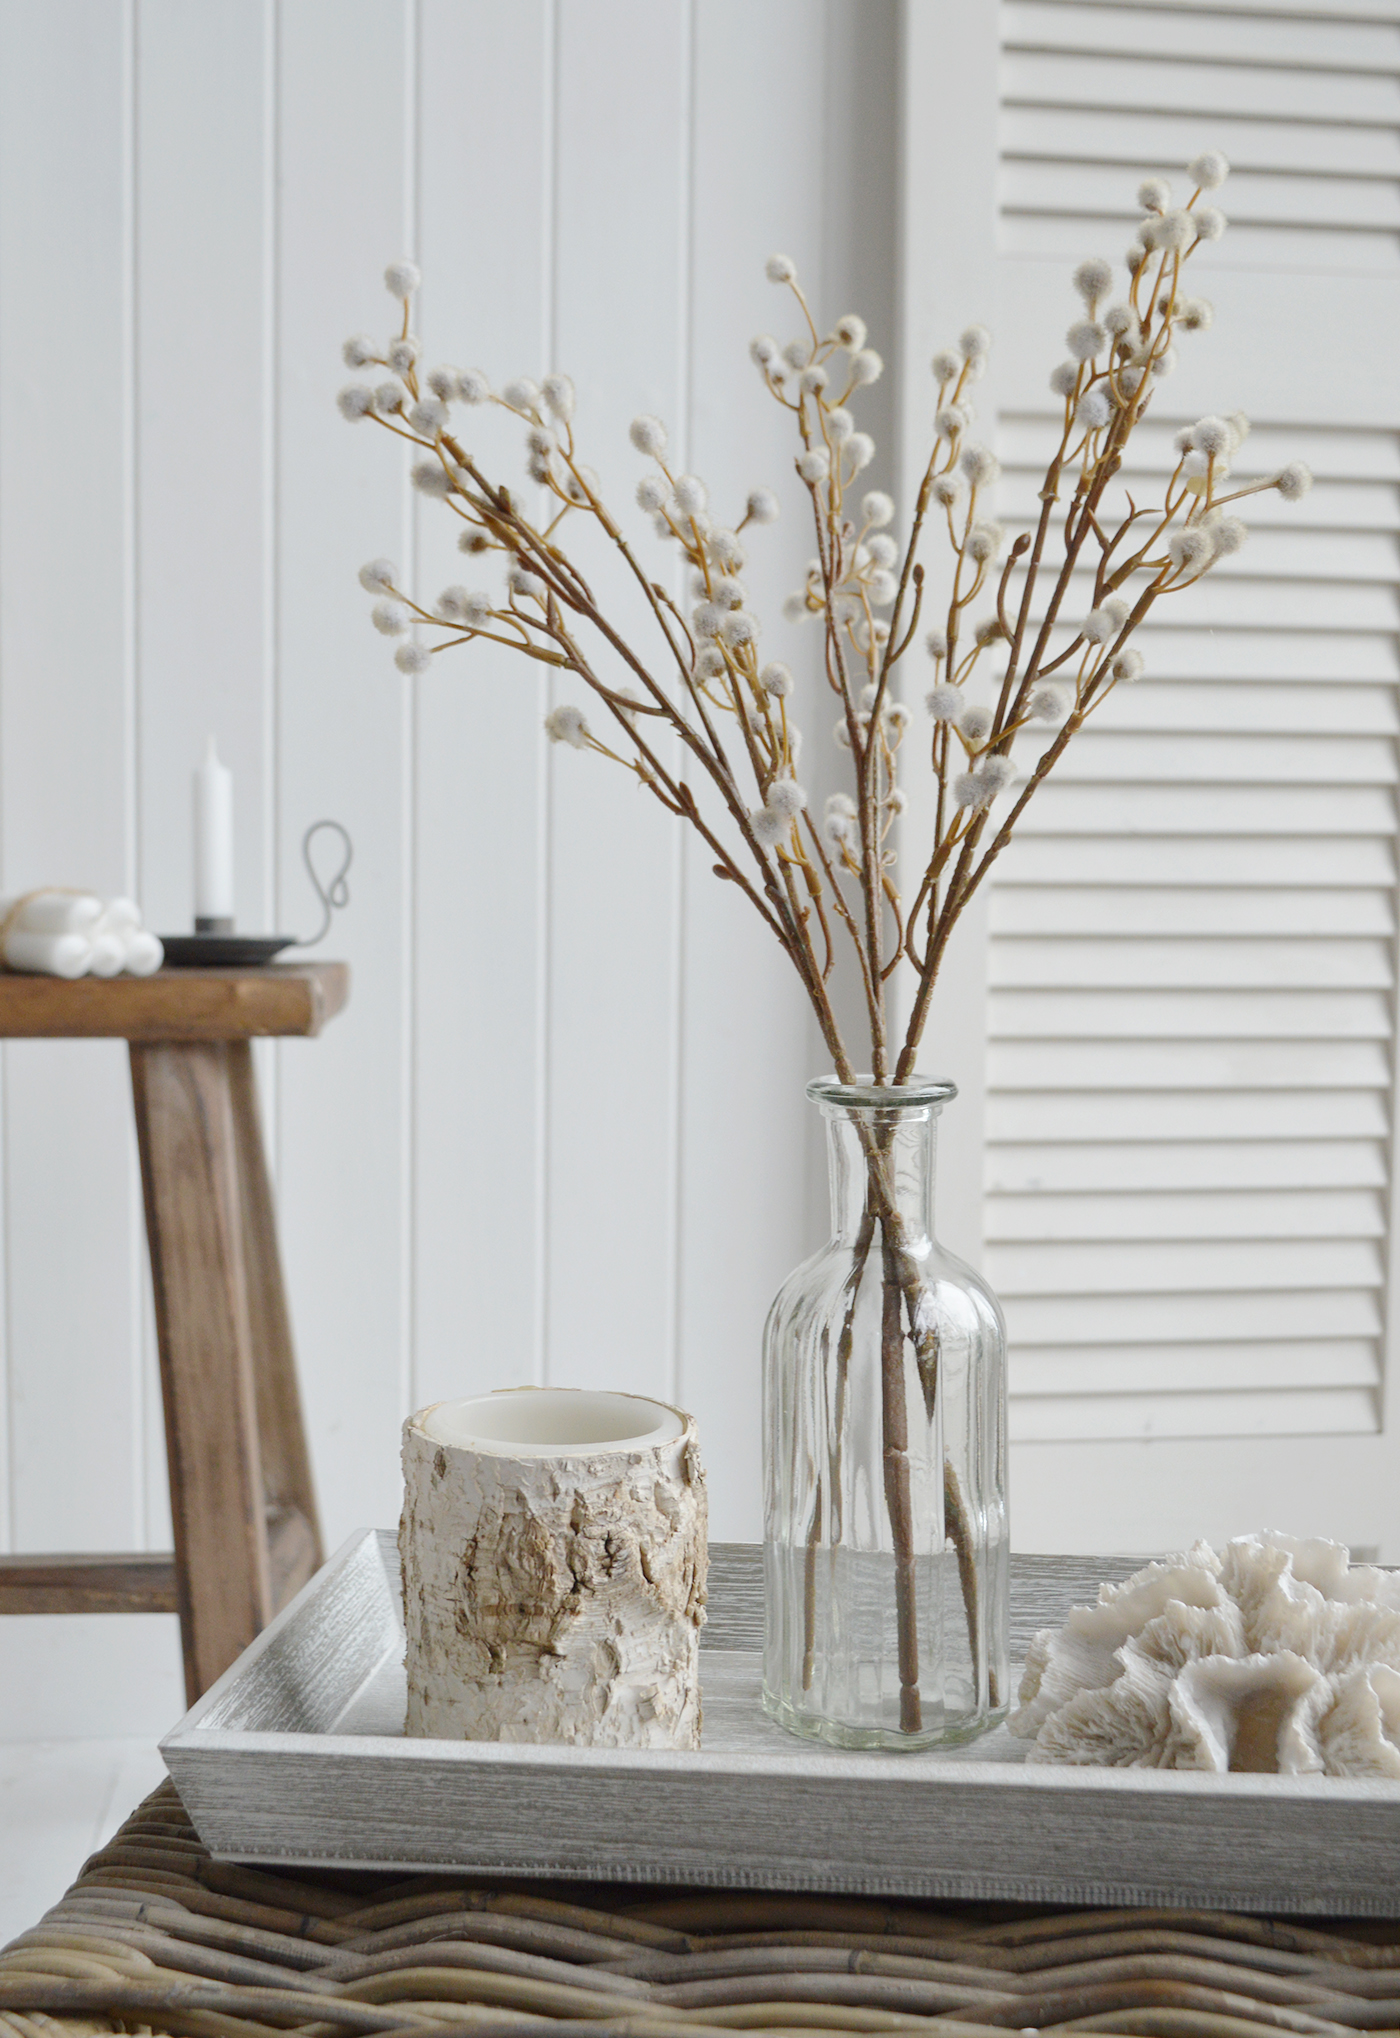 Faux Pussy Willow as coffee table decor in a coastal inspired home